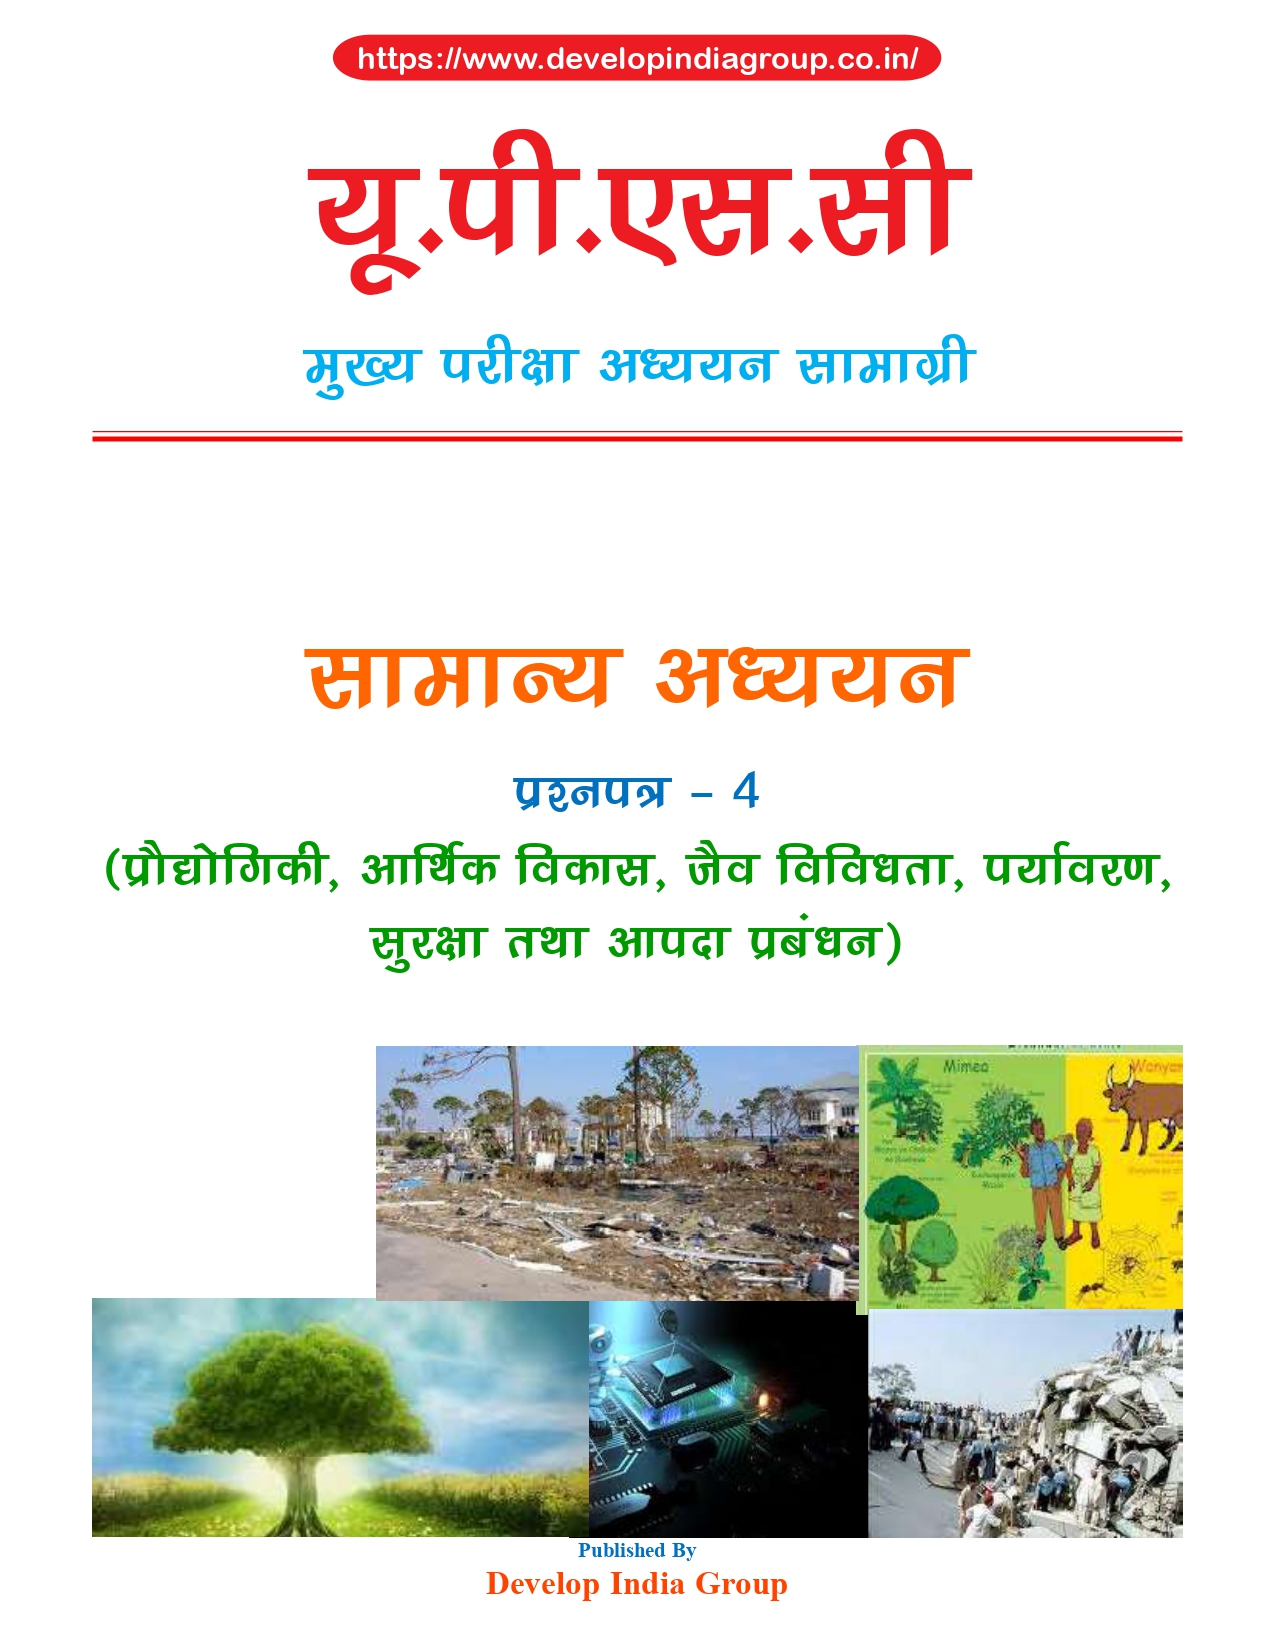 Technology Economic Development Bio diversity Environment security and disaster management cover in Hindi